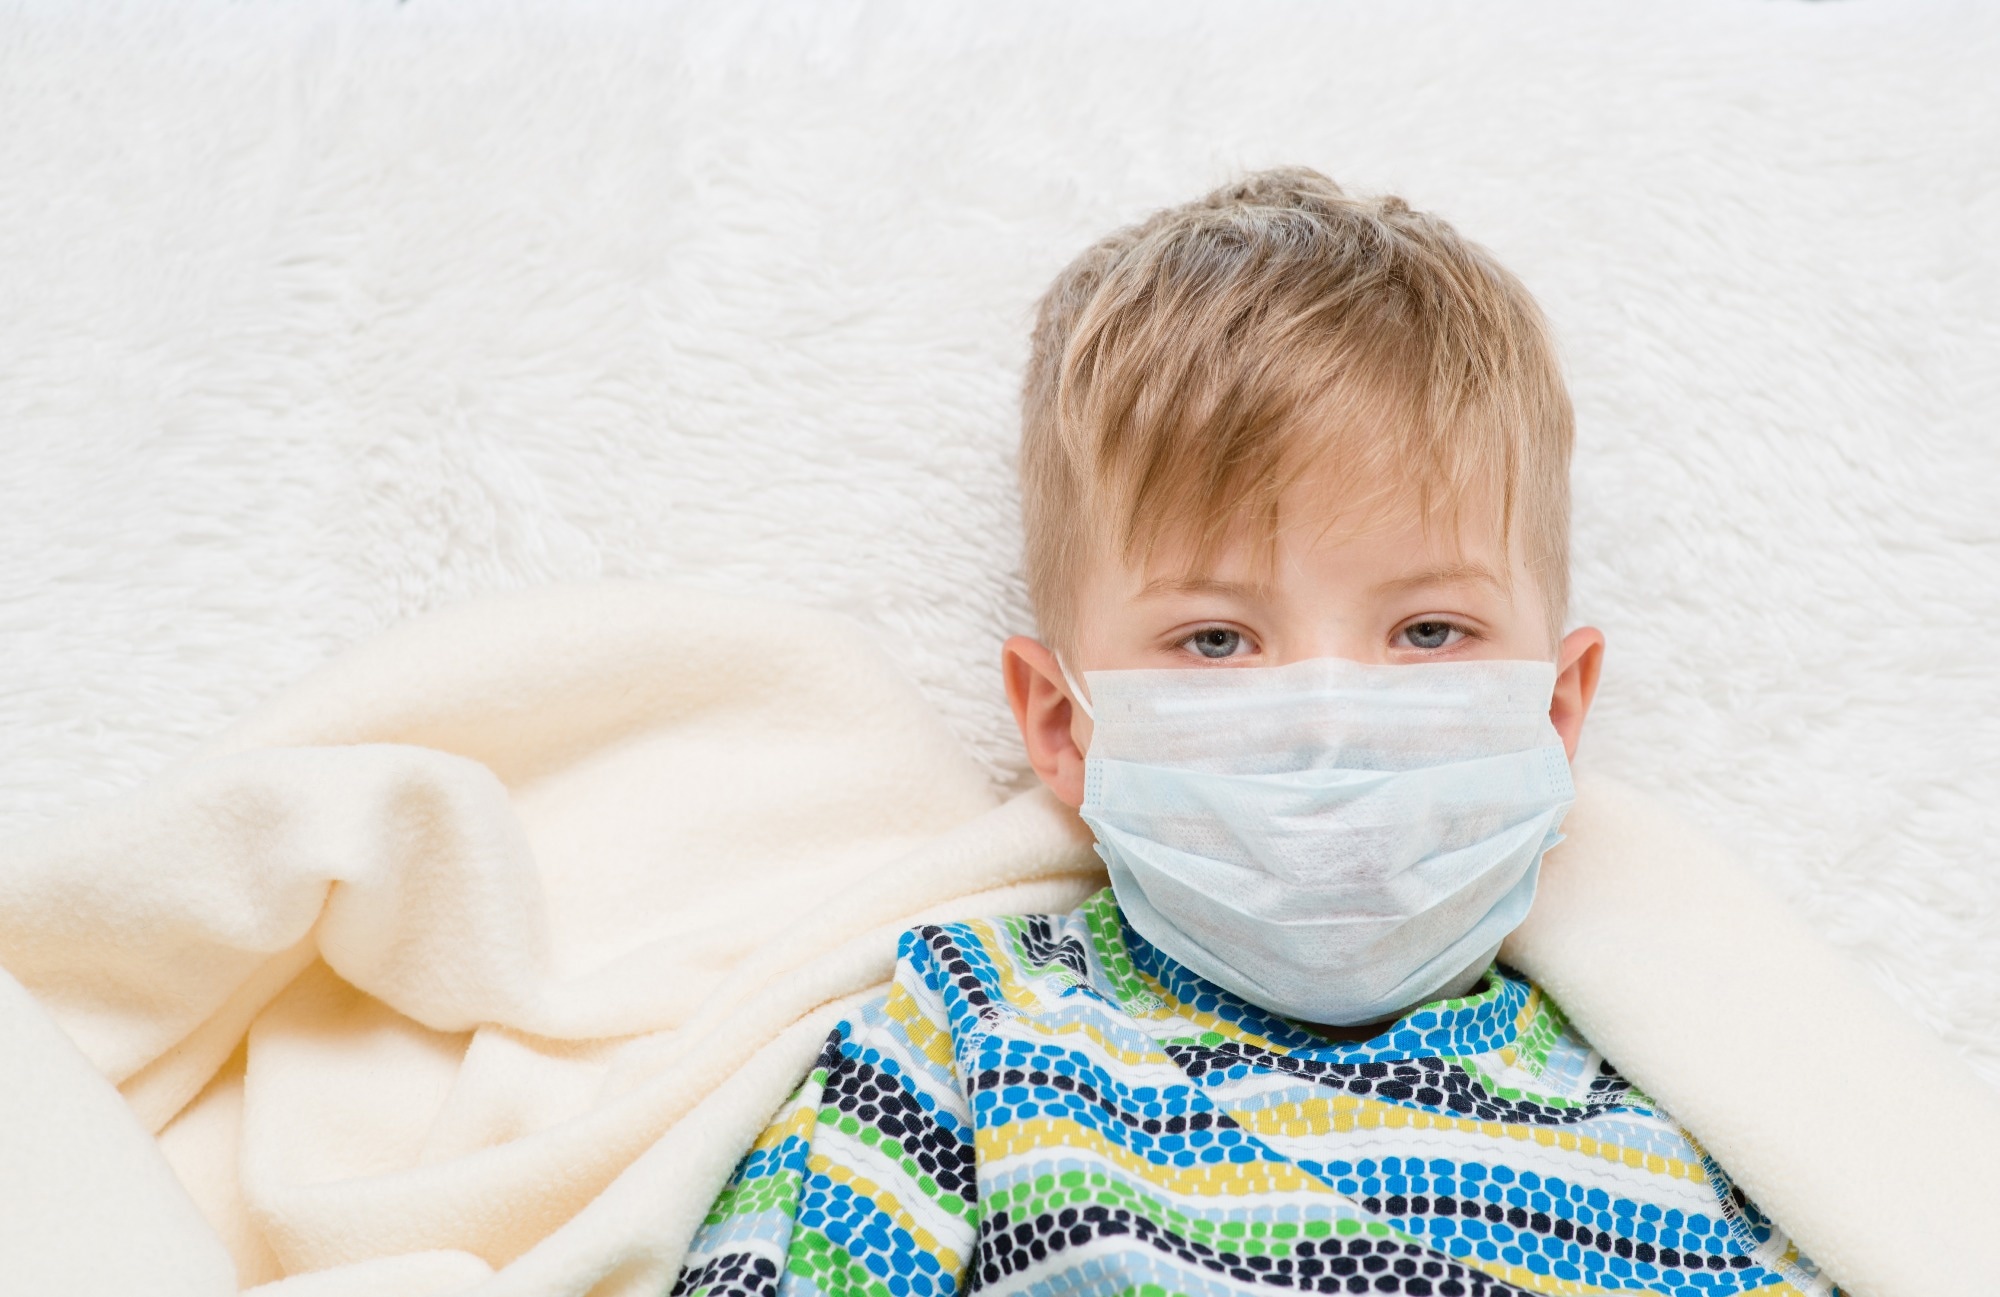 Study: Hospital admissions associated with SARS-CoV-2 infection in children and young people: cohort study of 3.2 million first-identified infections in England.  Image credit: Ermolaev Alexander / Shutterstock.com